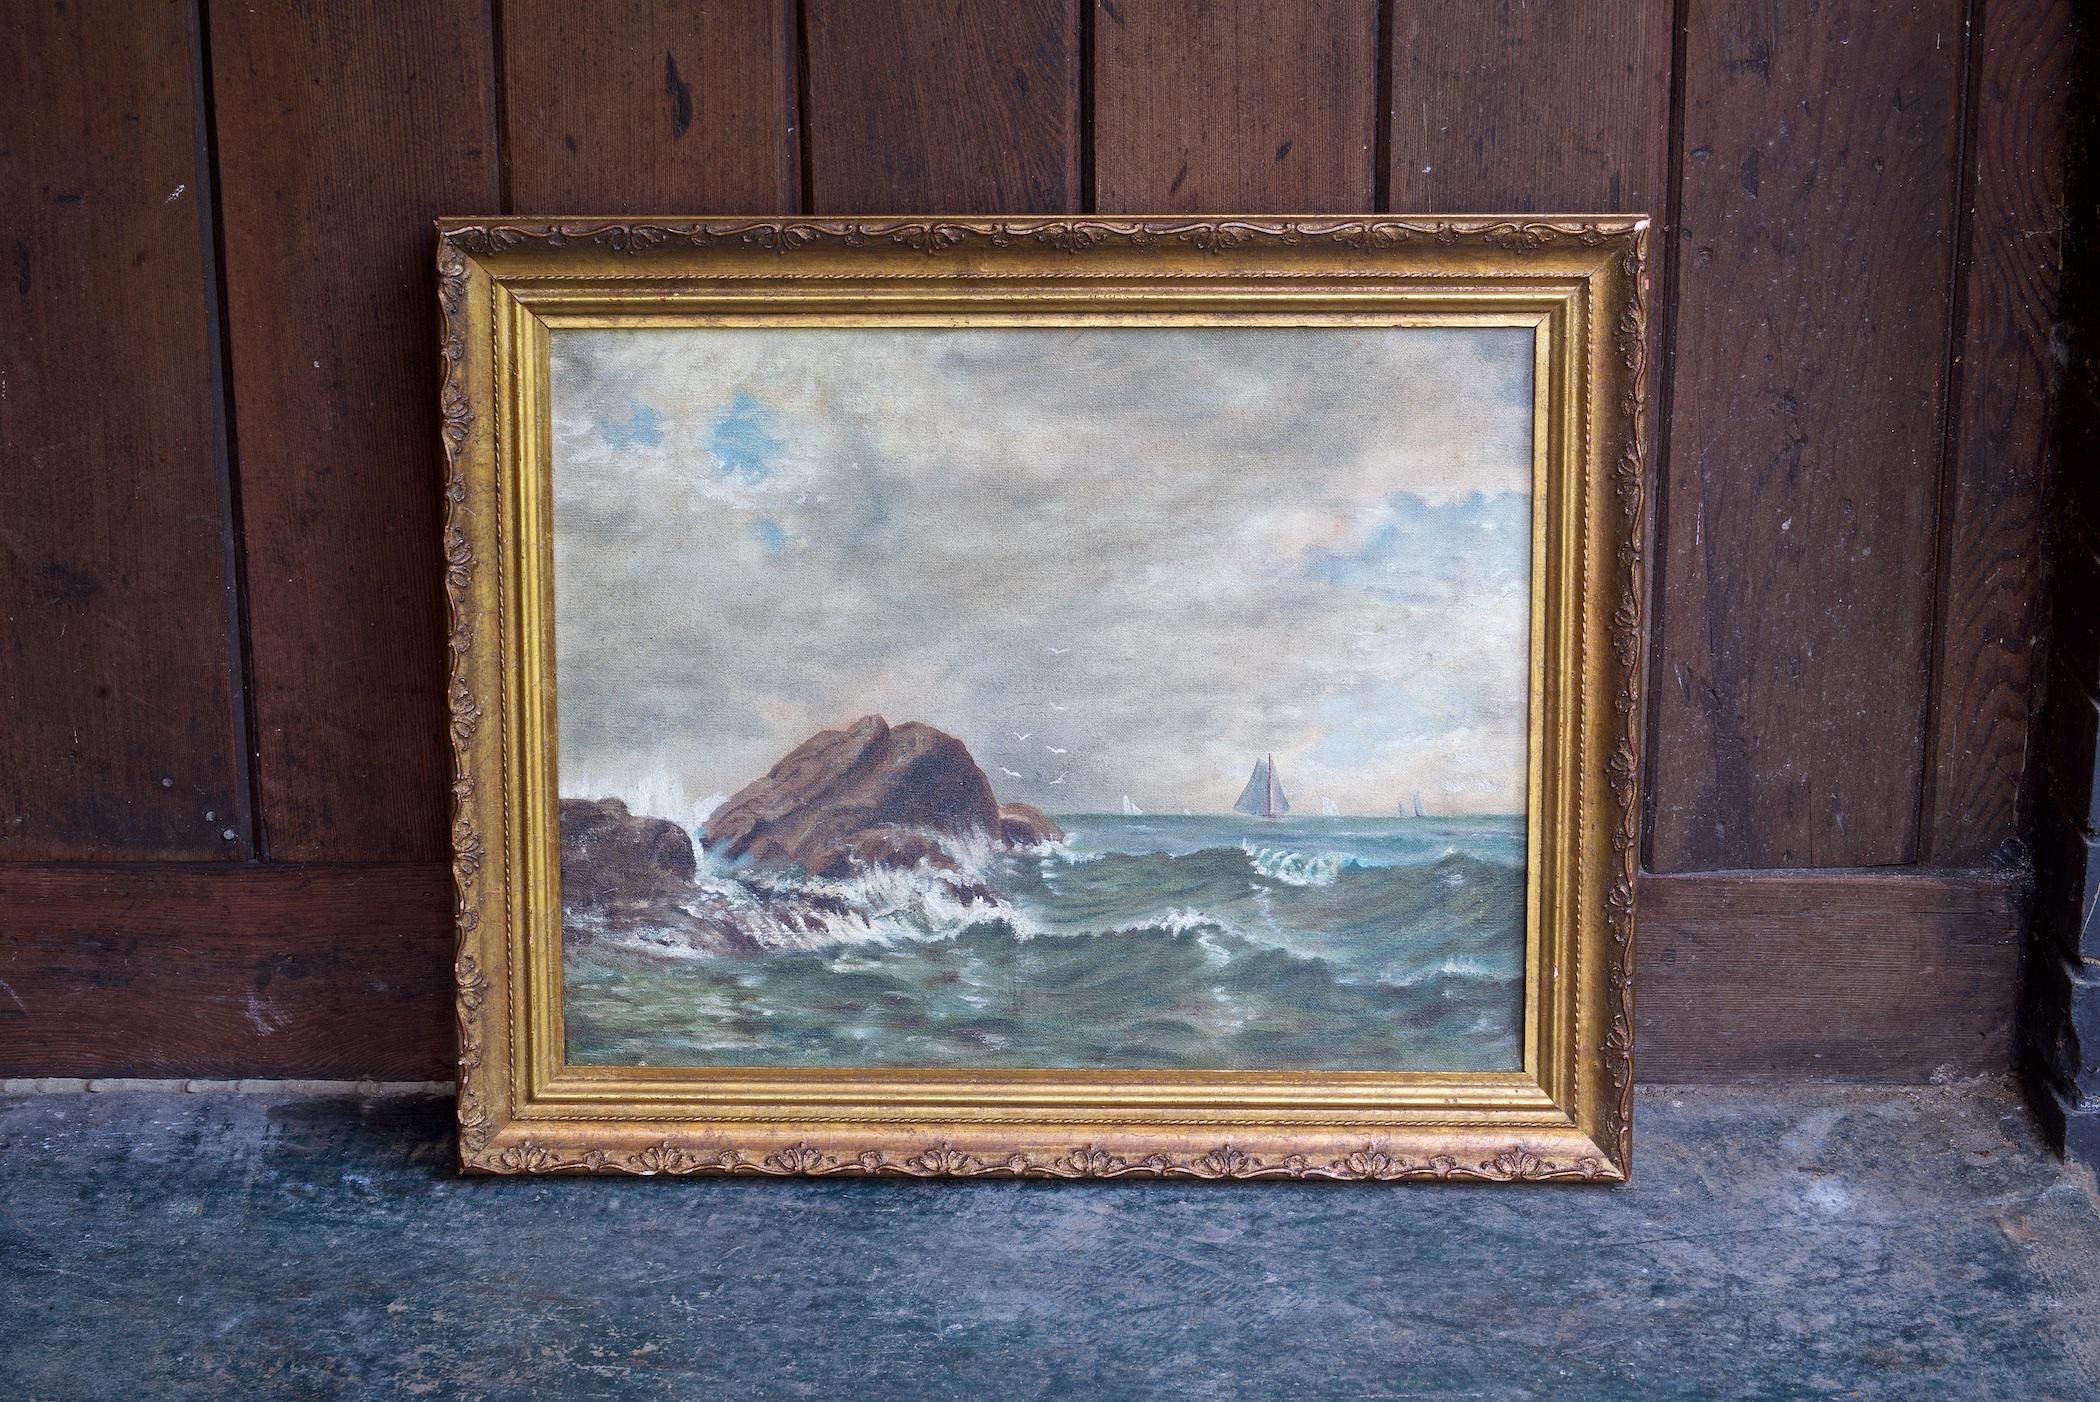 Unsigned Maritime oil painting. Very good quality, by the hand of a professional painter. The painting is soiled from 100 years of exposure. The frame has some losses (chips) to the gilt plastering.

Canvas without Frame W 18.25 x H 14.25 in.